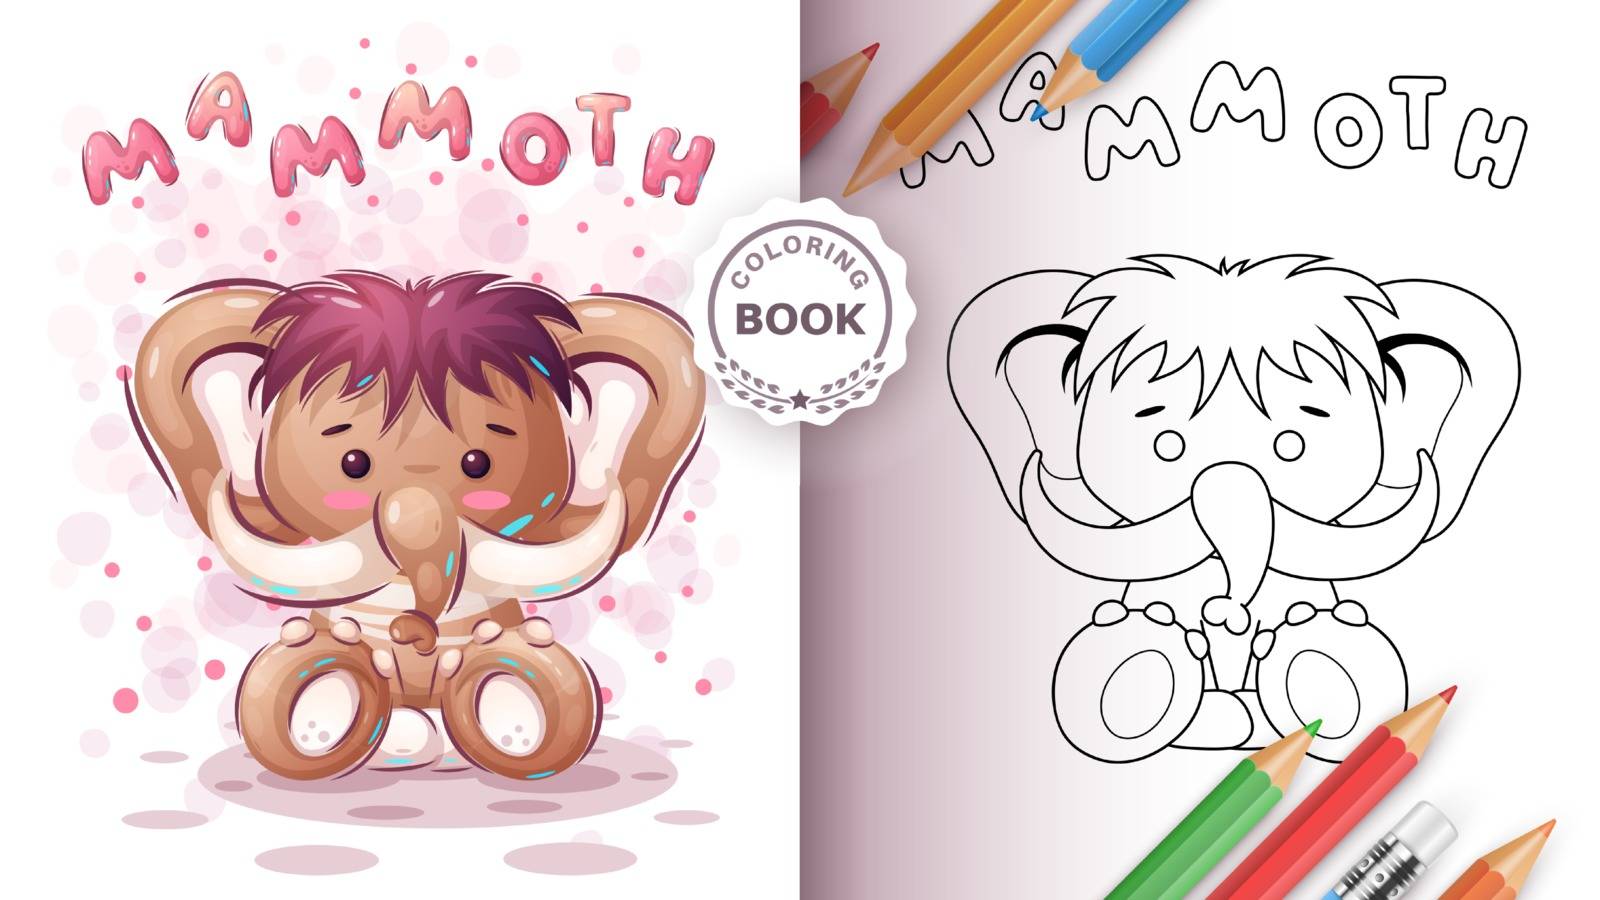 Teddy mammoth - coloring book for kind and children by rwgusev